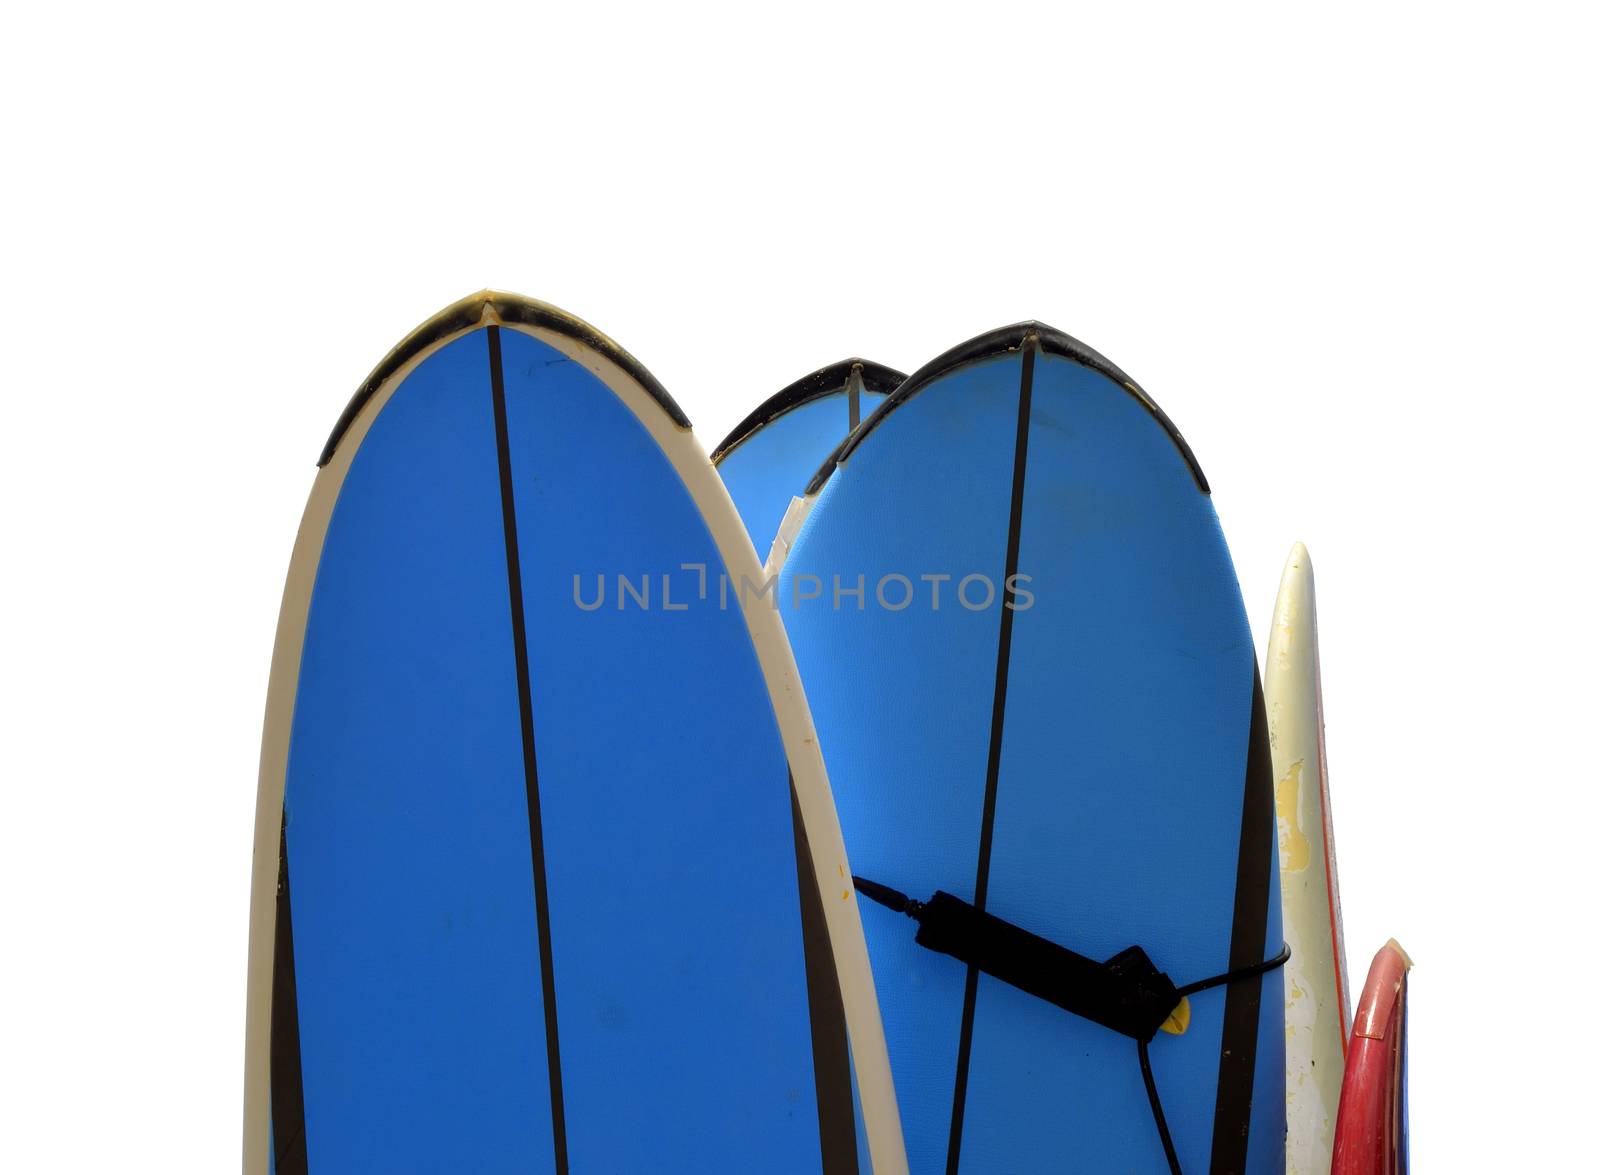 Vacation And Sport Image Of Surfboards With Copy Space